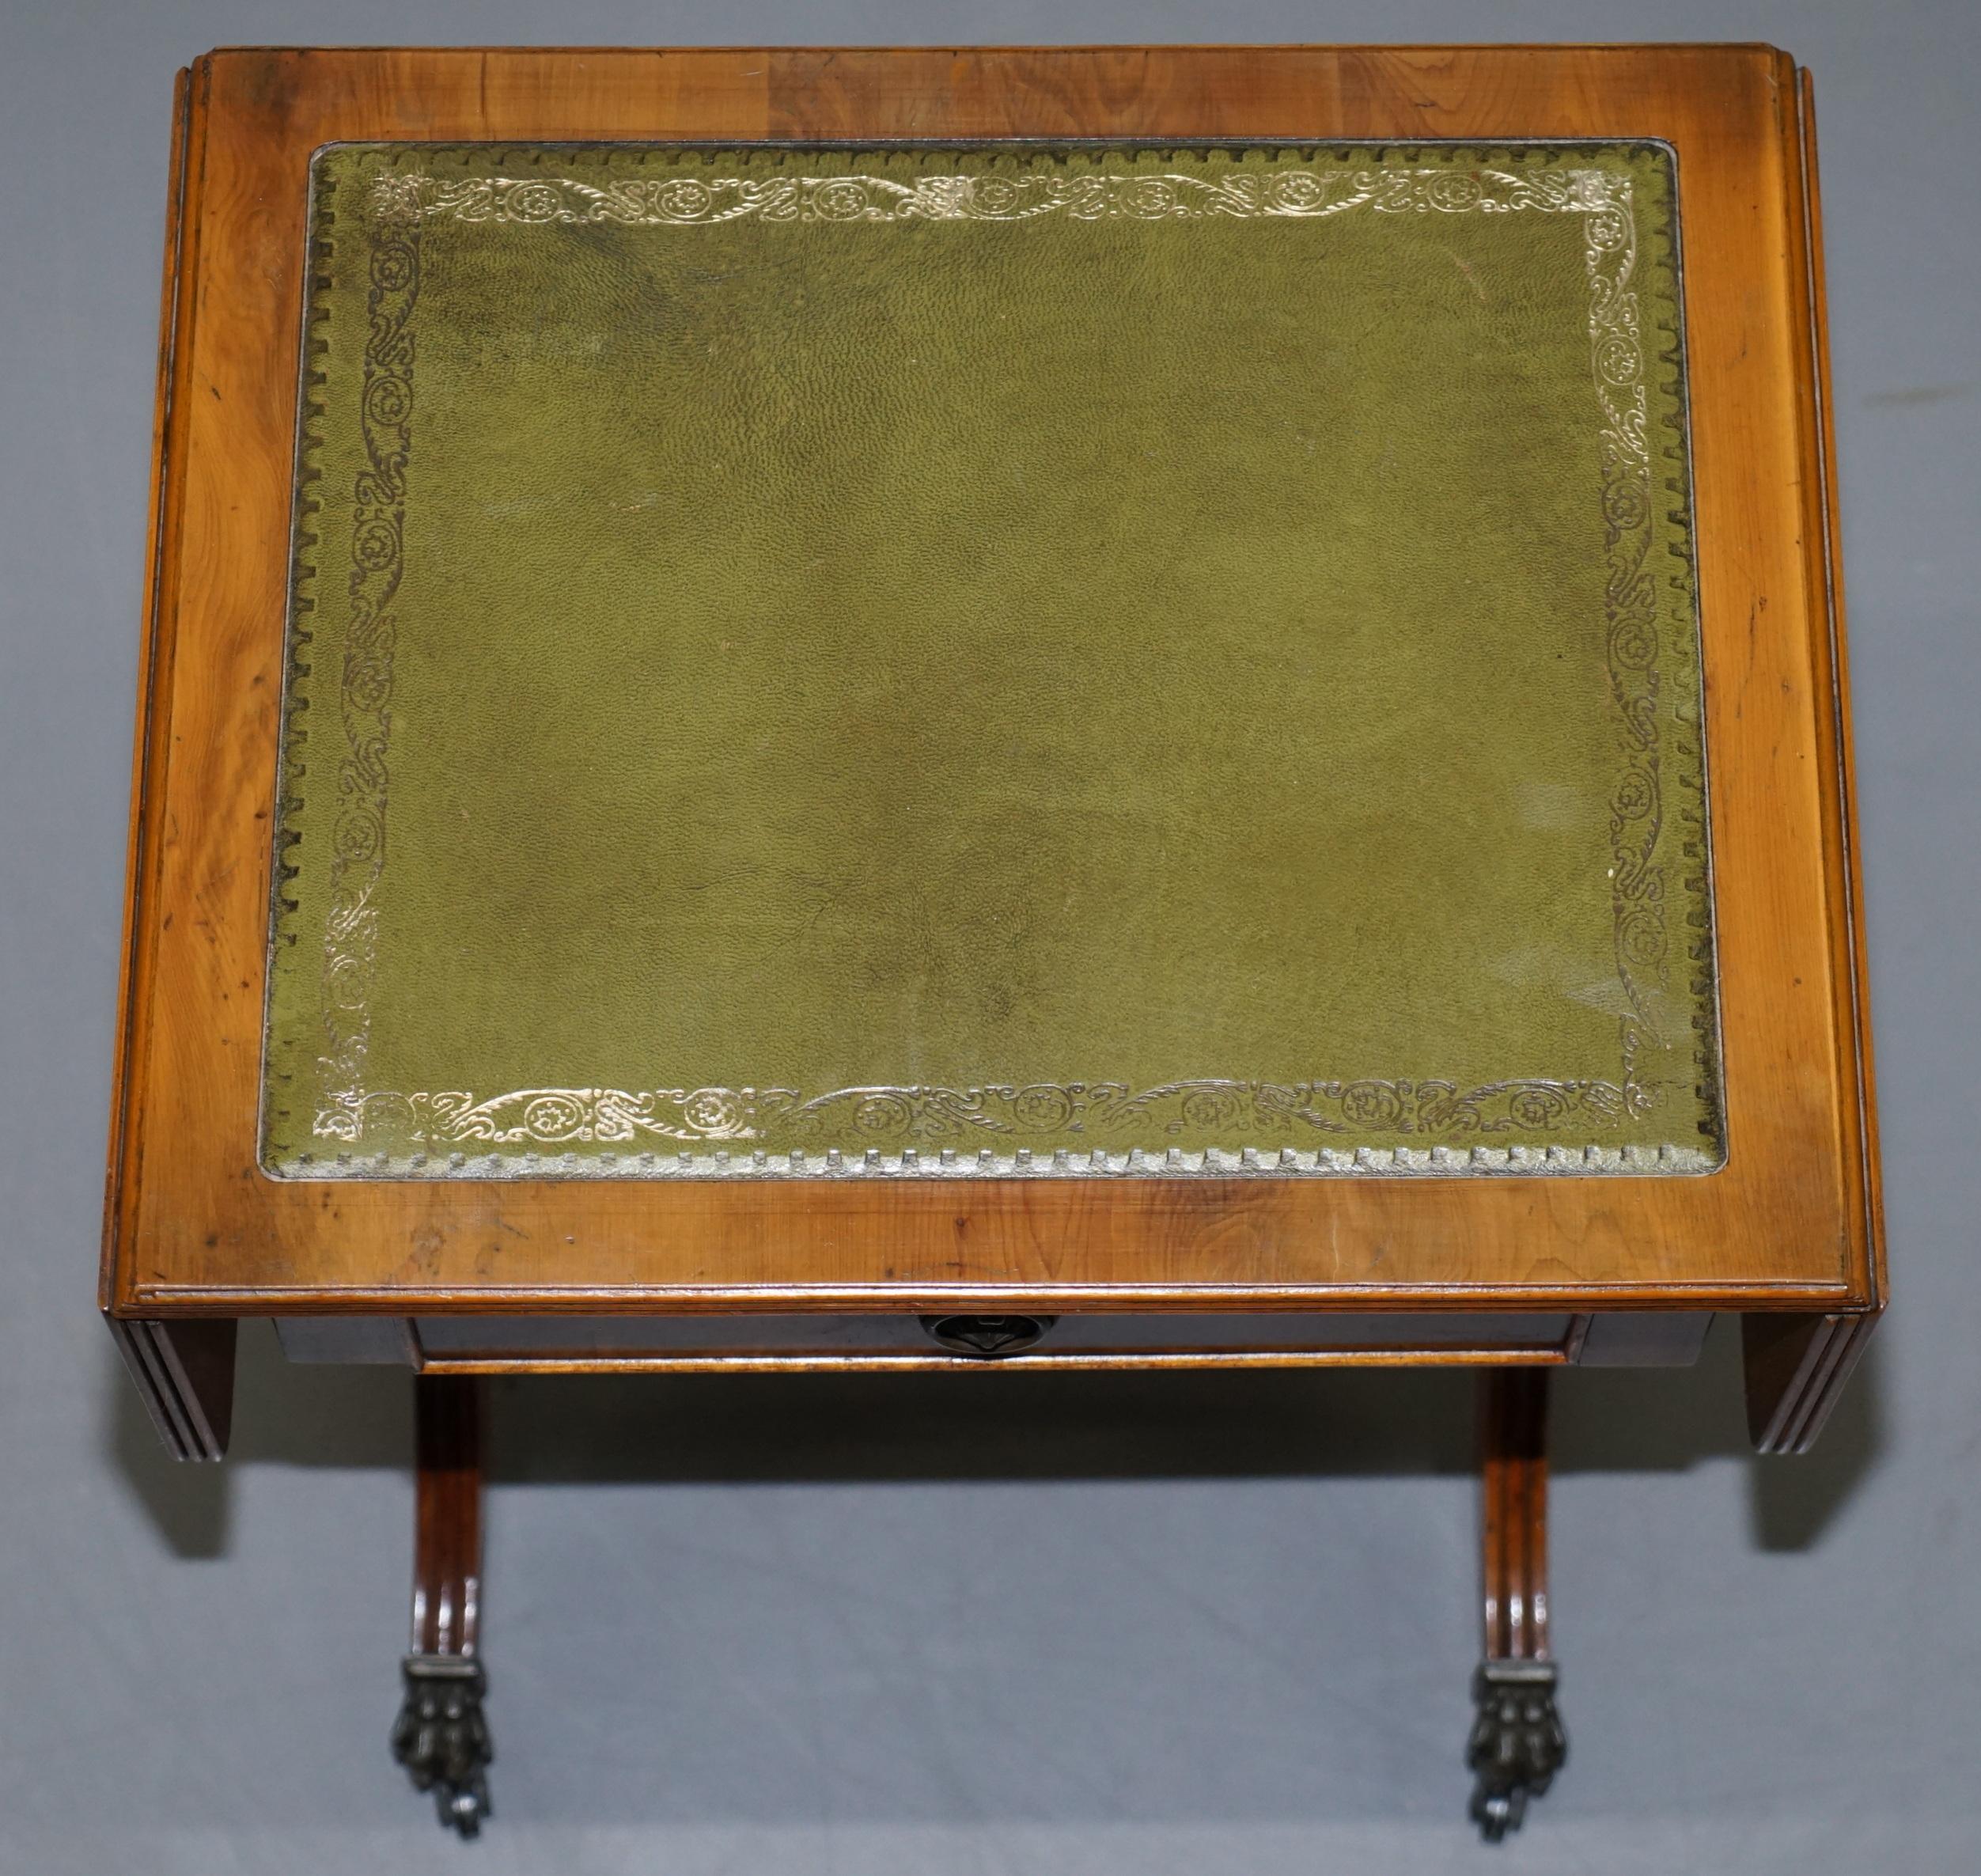 English Stunning Small Side Table with Extending Green Leather Gold Leaf Embossed Top